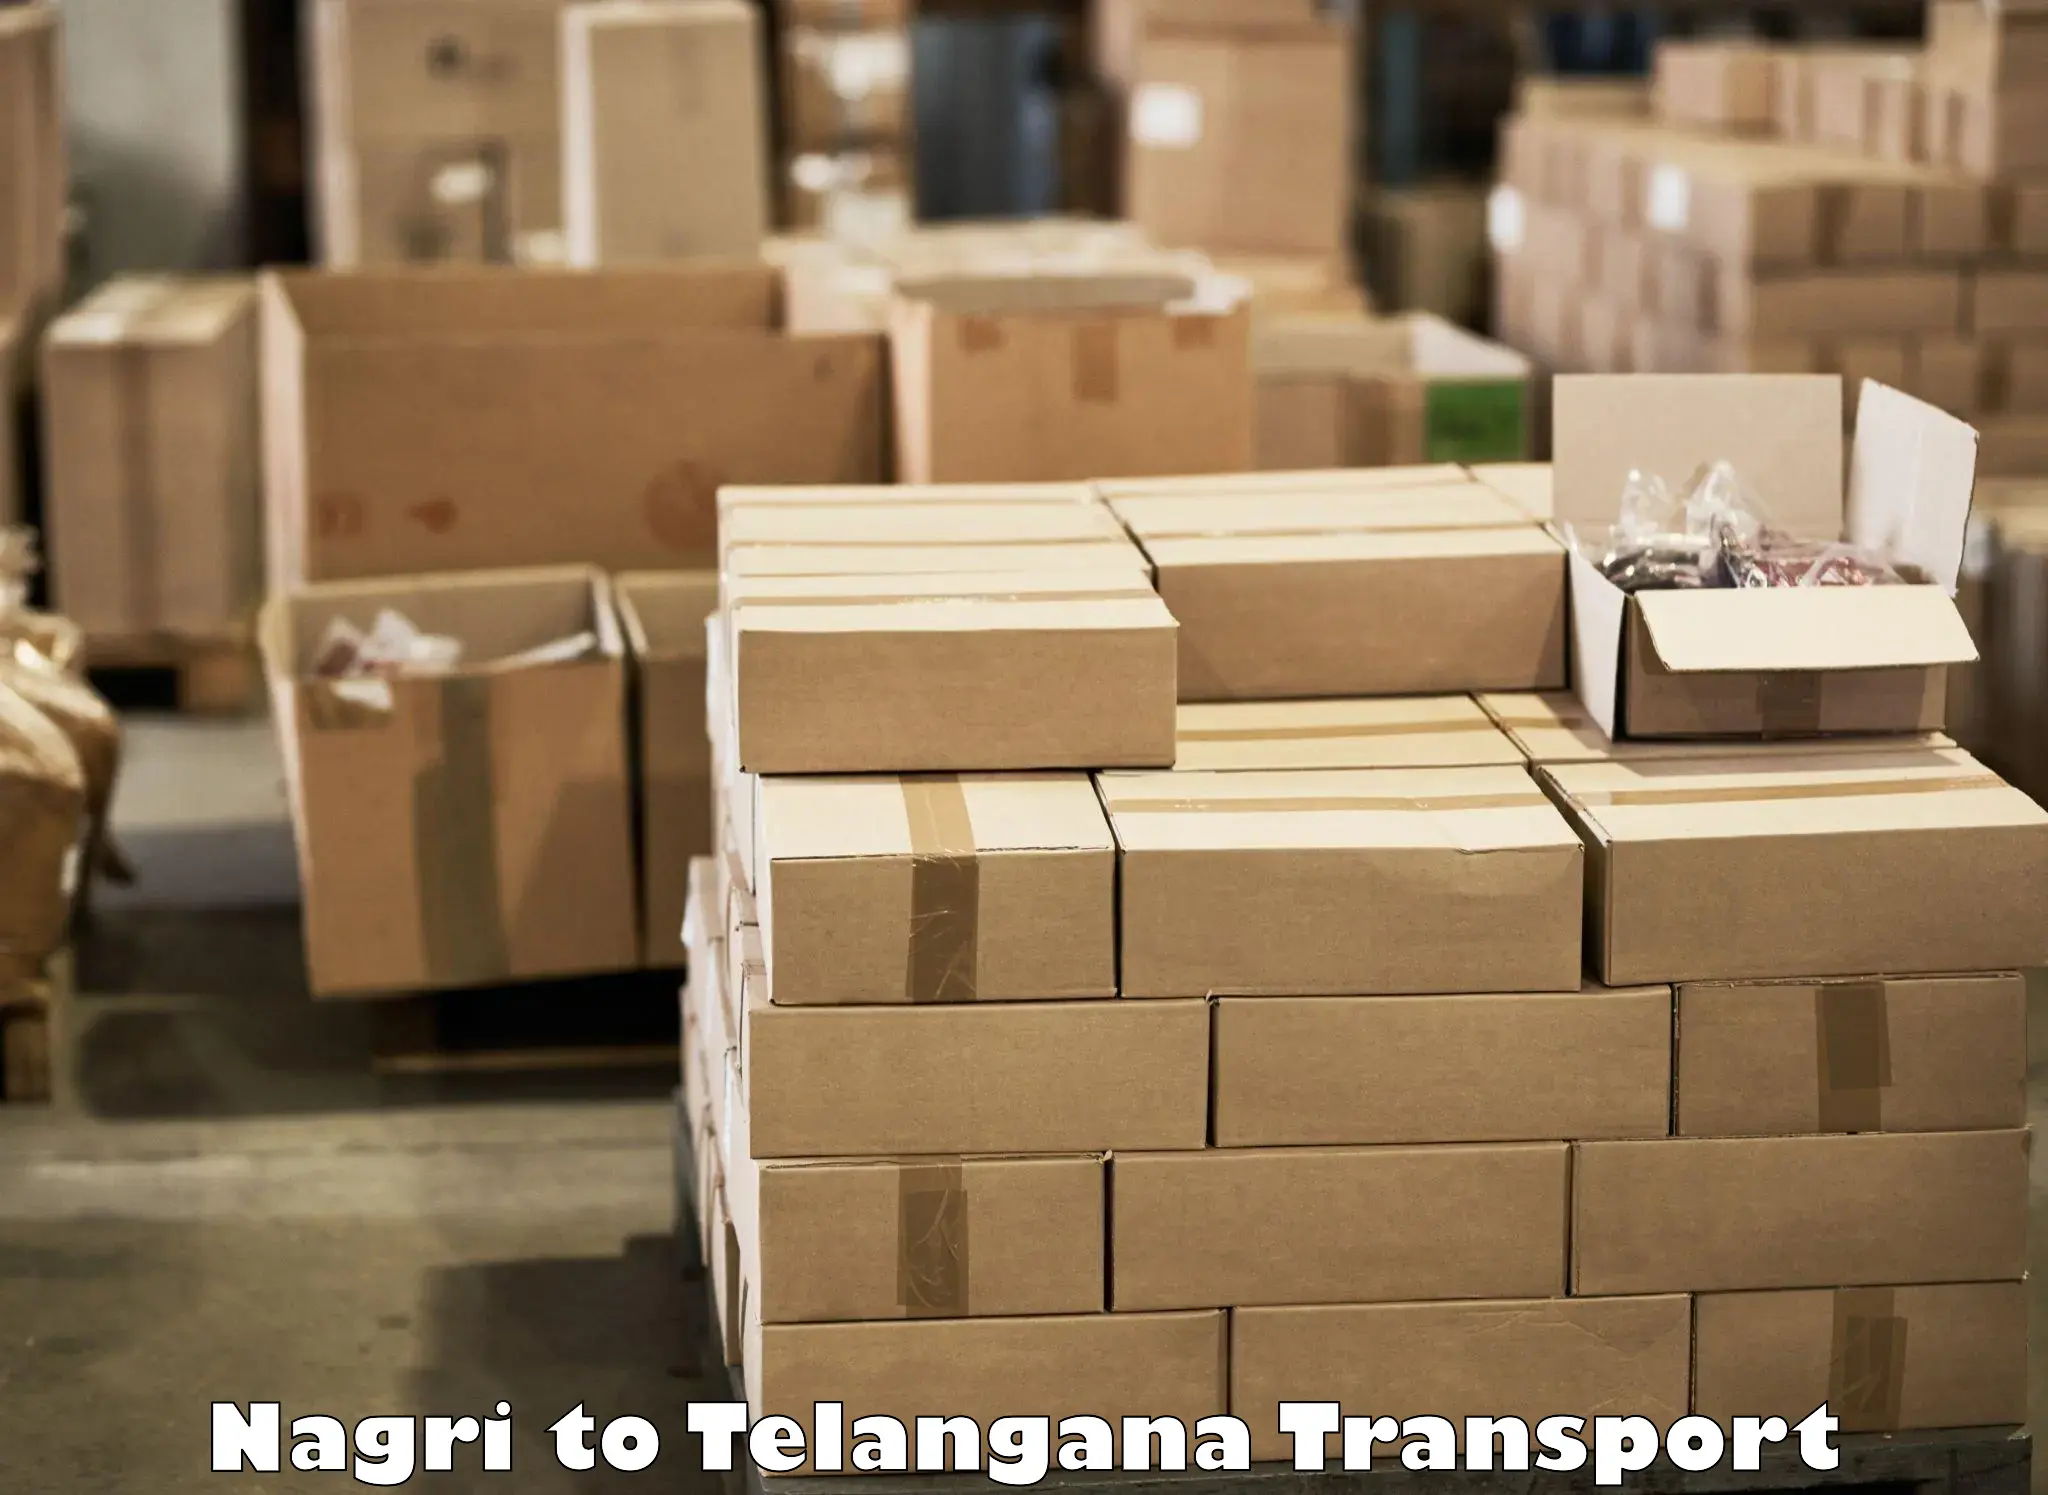 Truck transport companies in India Nagri to Mominpet